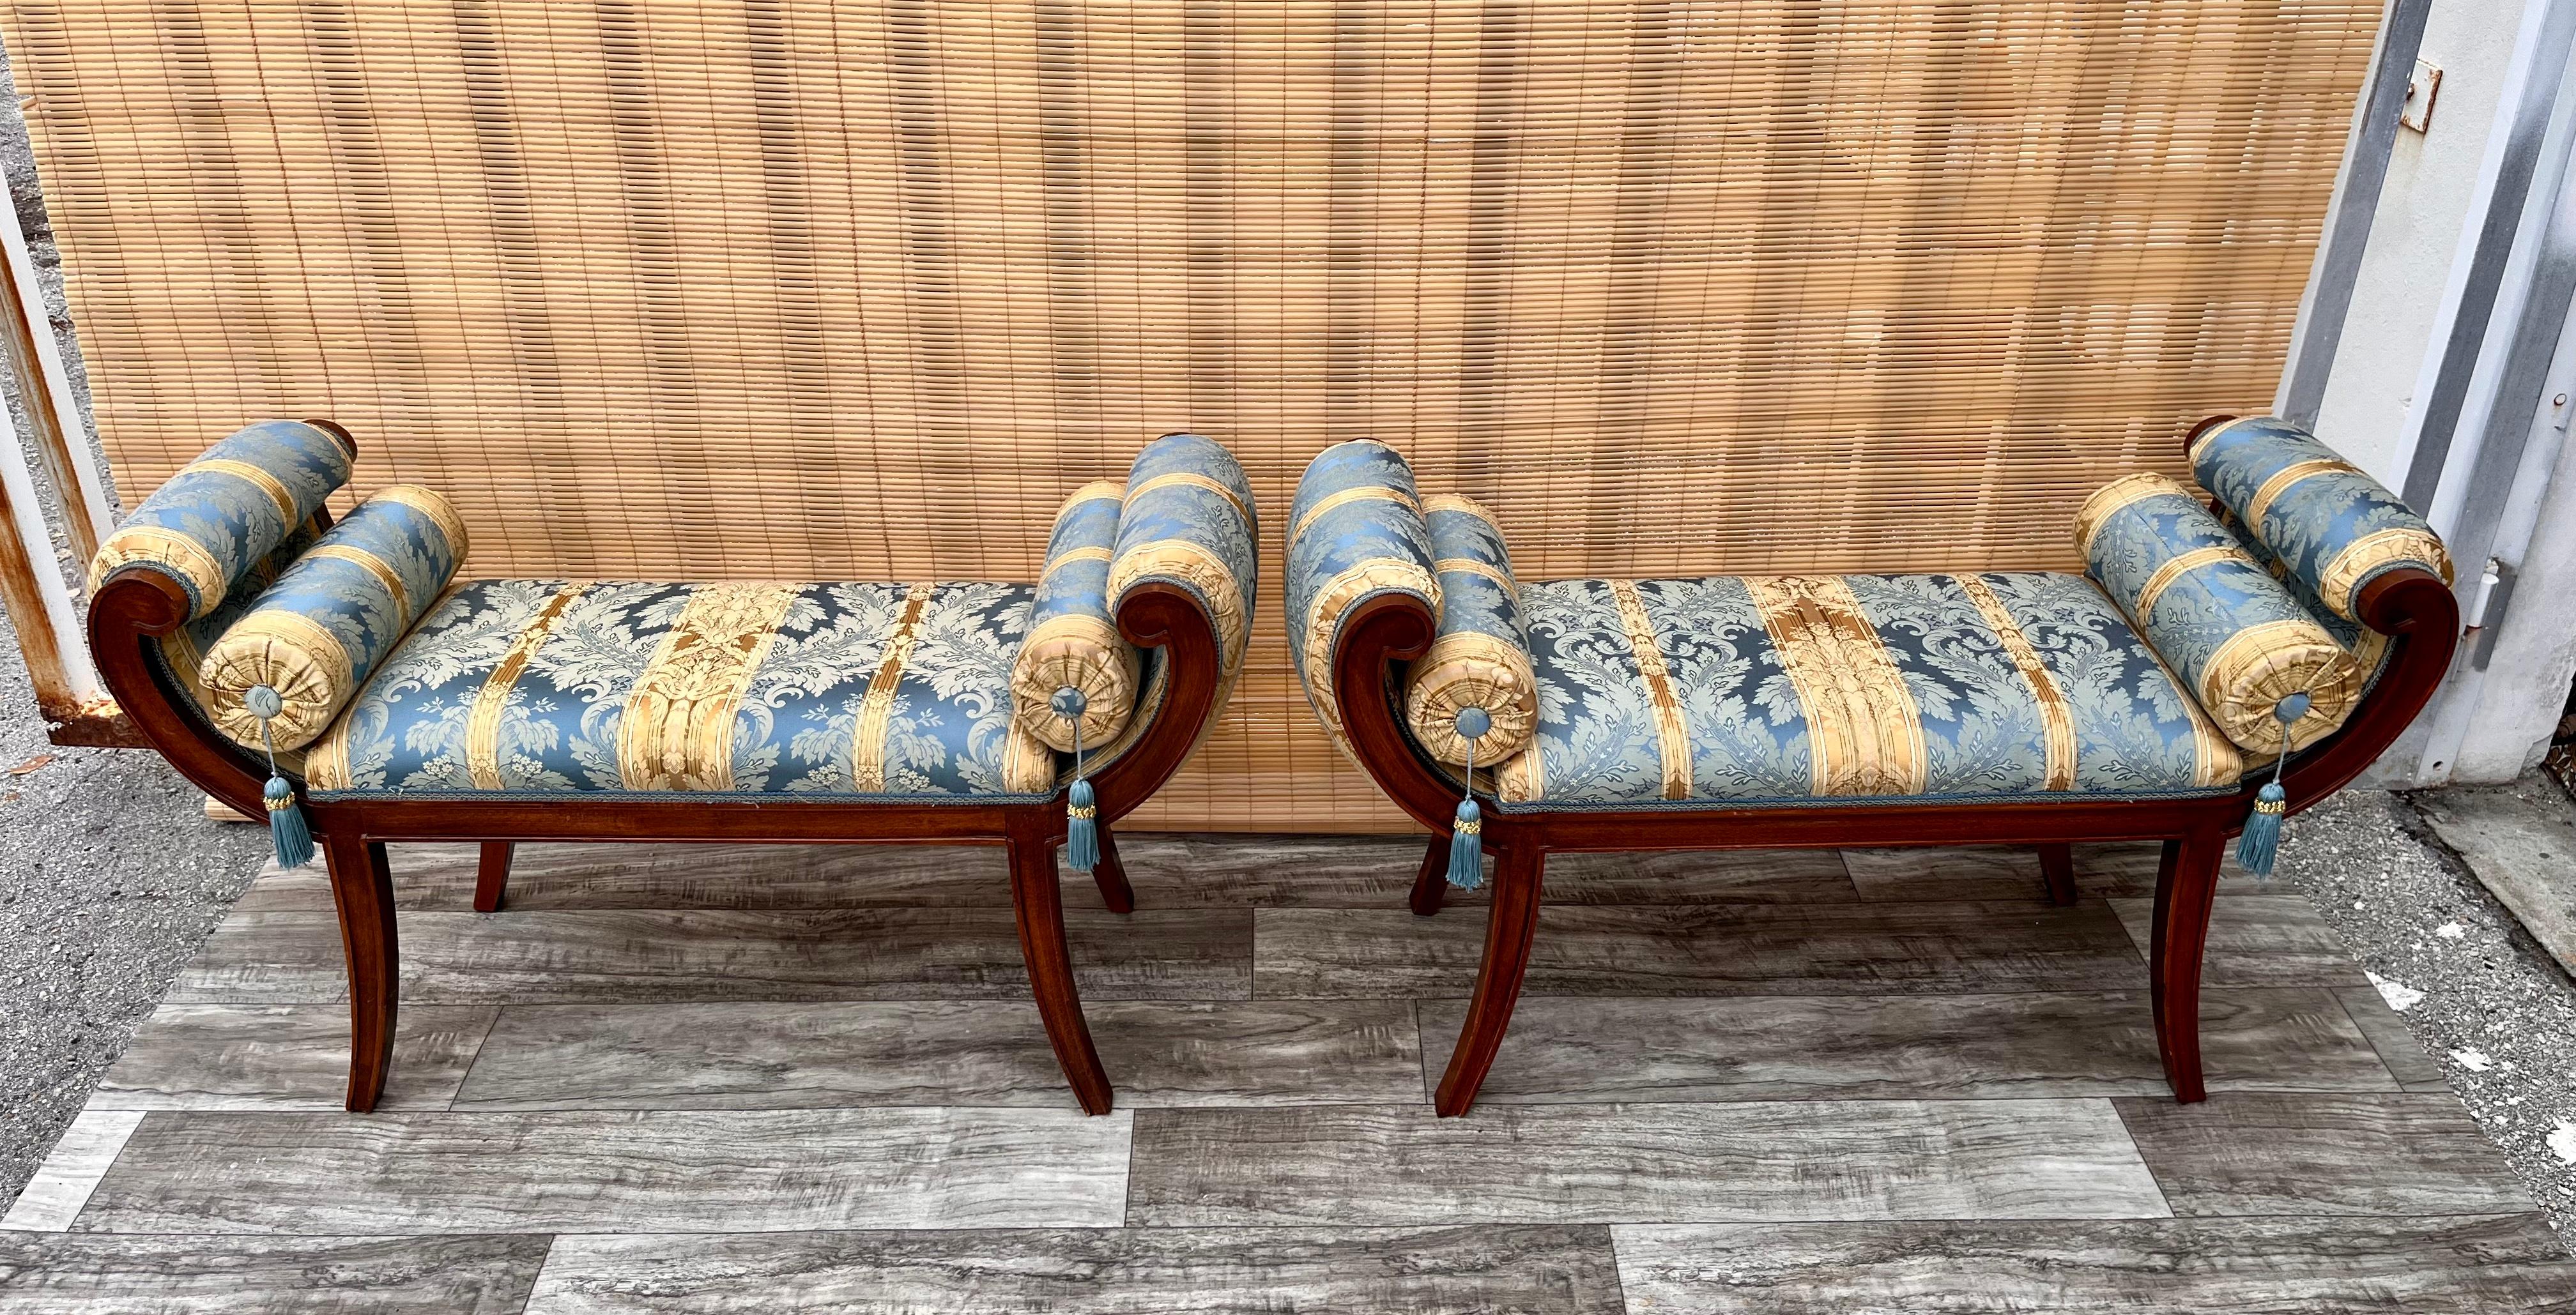 A Pair of Late 20th Century Hollywood Regency / Neoclassical Revival Style Window Benches. 
Feature a solid wood carved frame with scroll armrests and slightly curved legs, upholstered with exquisite gold and blue fabric, and embellished with two